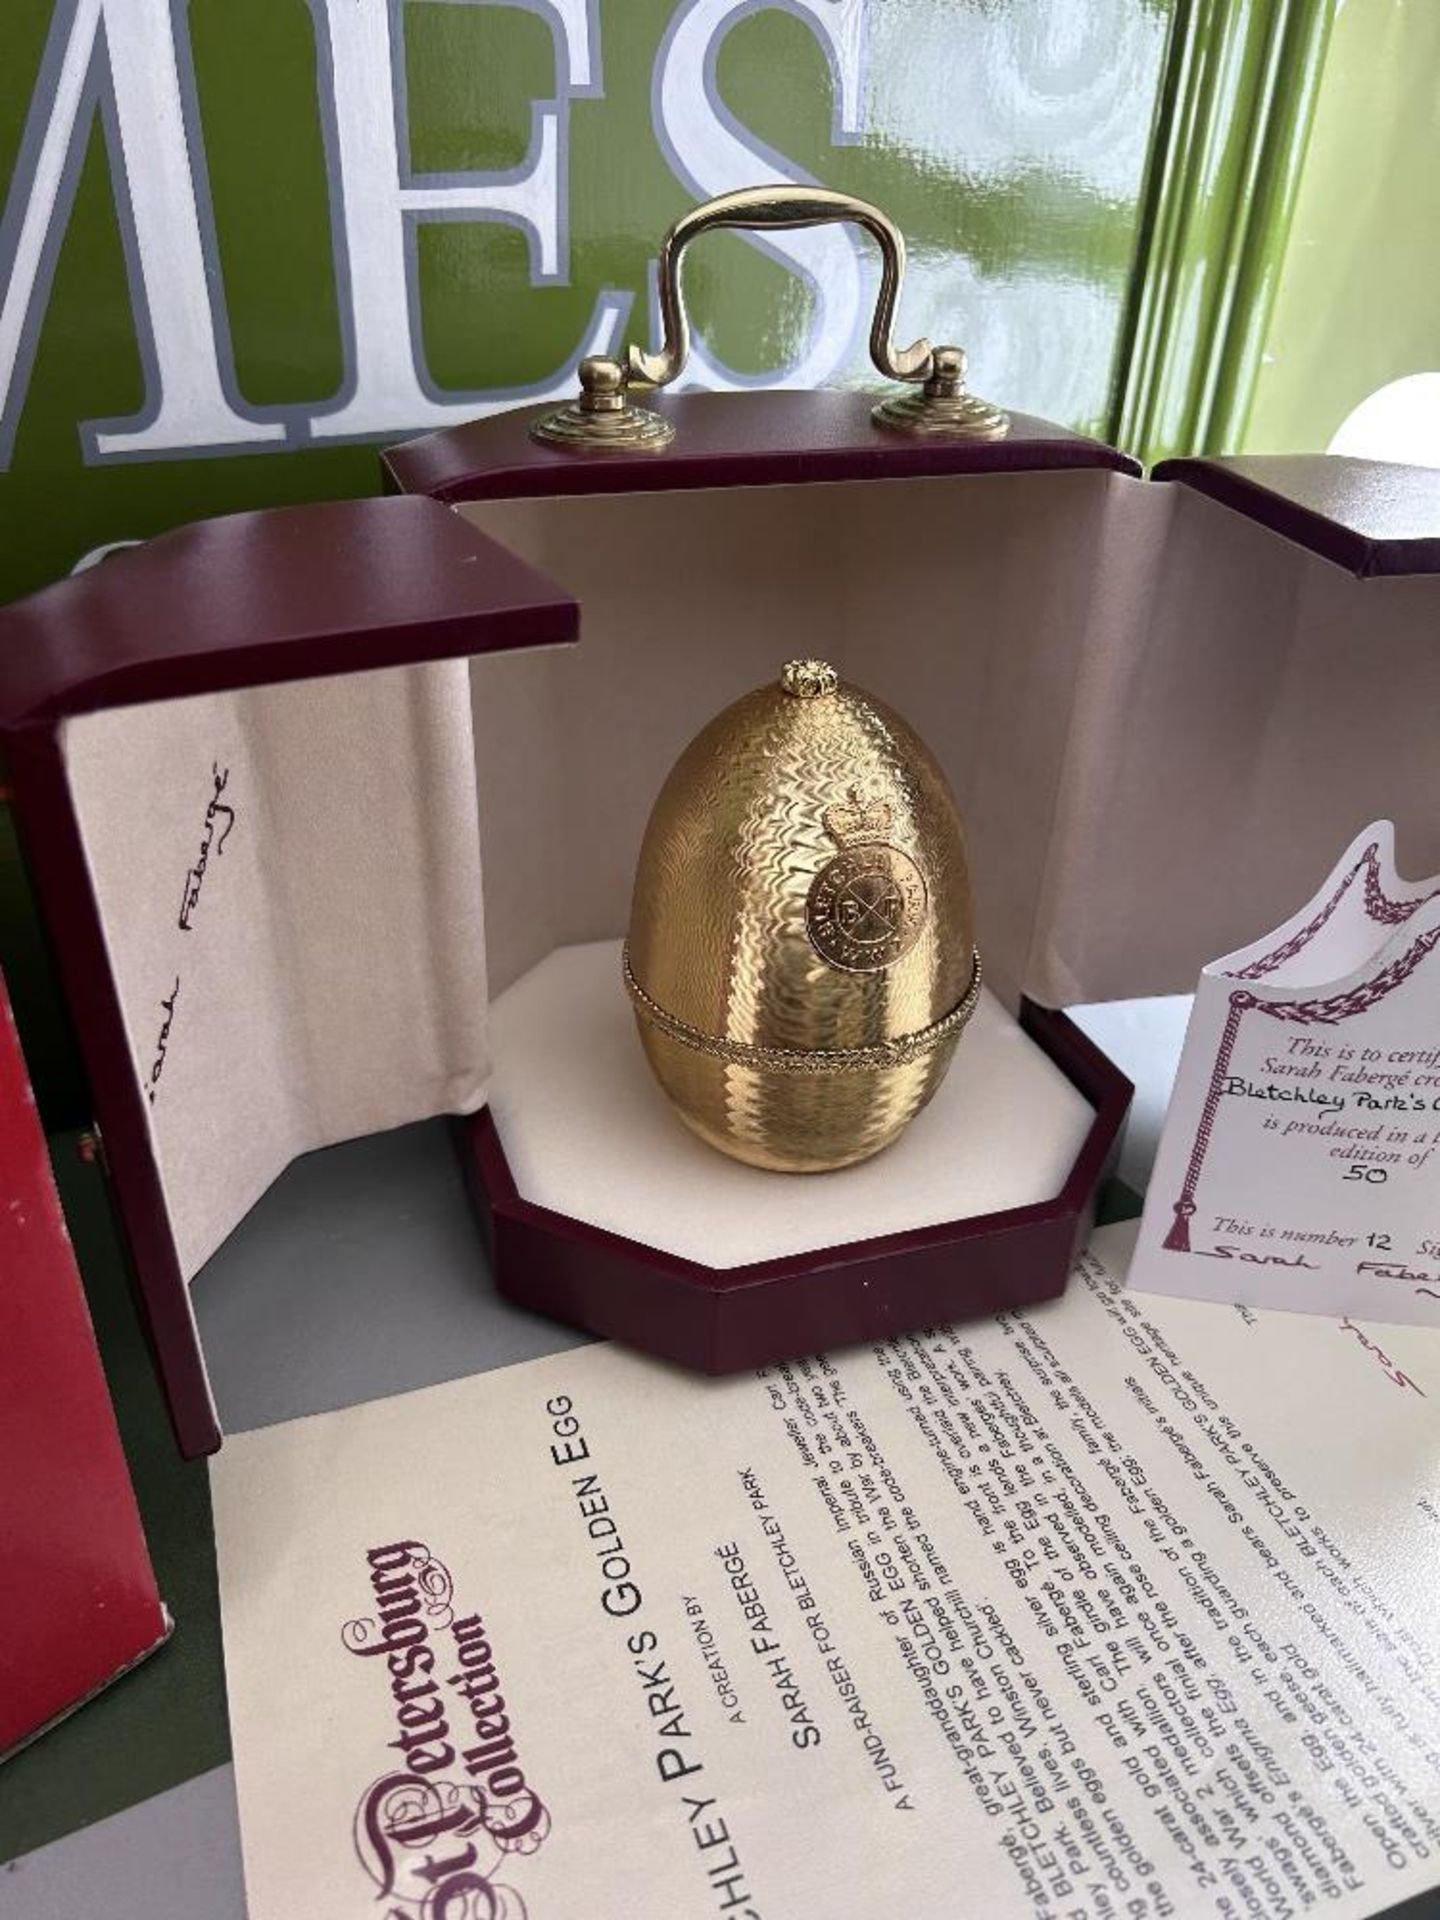 Faberge` 24 Carat Gold Diamond Egg, #12/50 Bletchley Park Edition.WW2 - Image 2 of 10